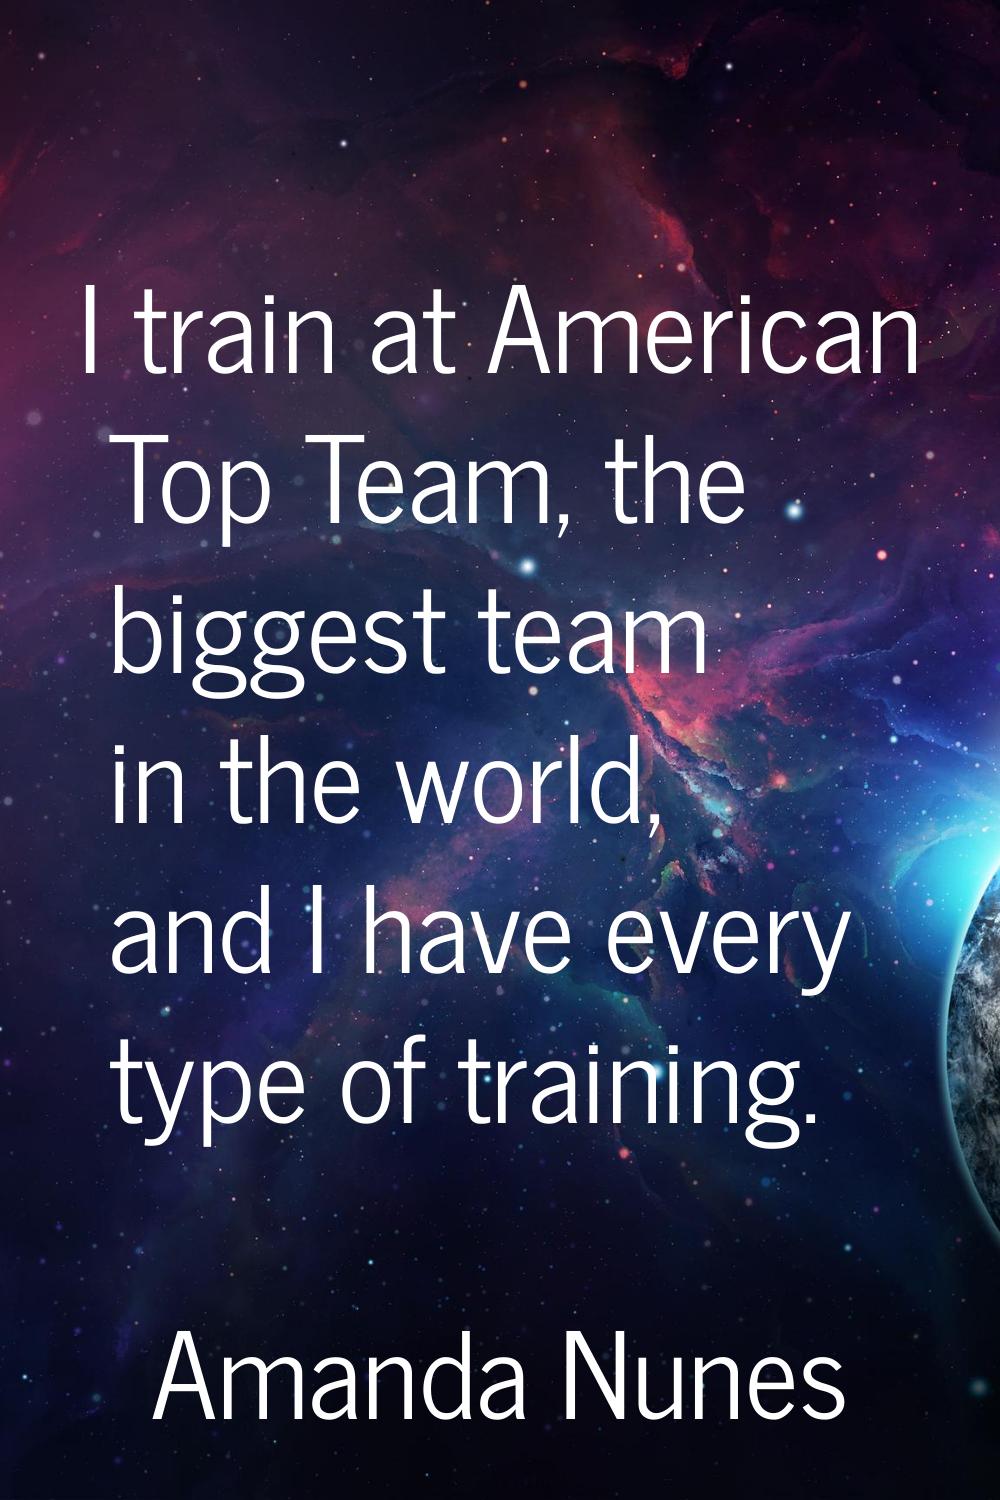 I train at American Top Team, the biggest team in the world, and I have every type of training.